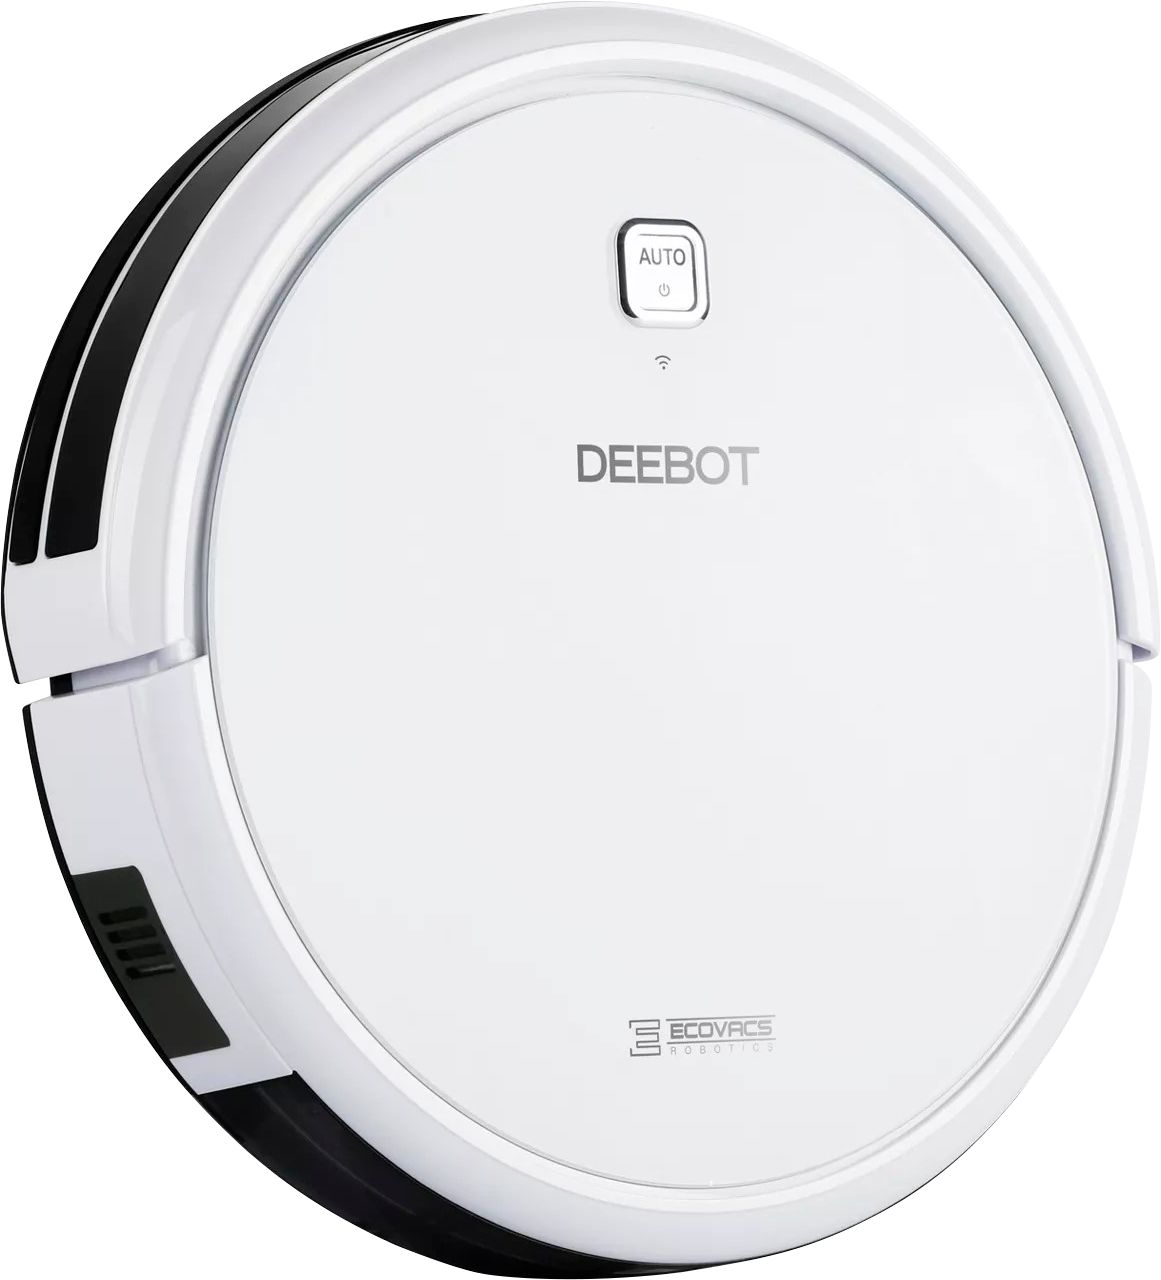 Hard floor ECOVACS DEEBOT N79 Robotic Vacuum Cleaner with Strong Suction for Low-pile Carpet Wi-Fi Connected 